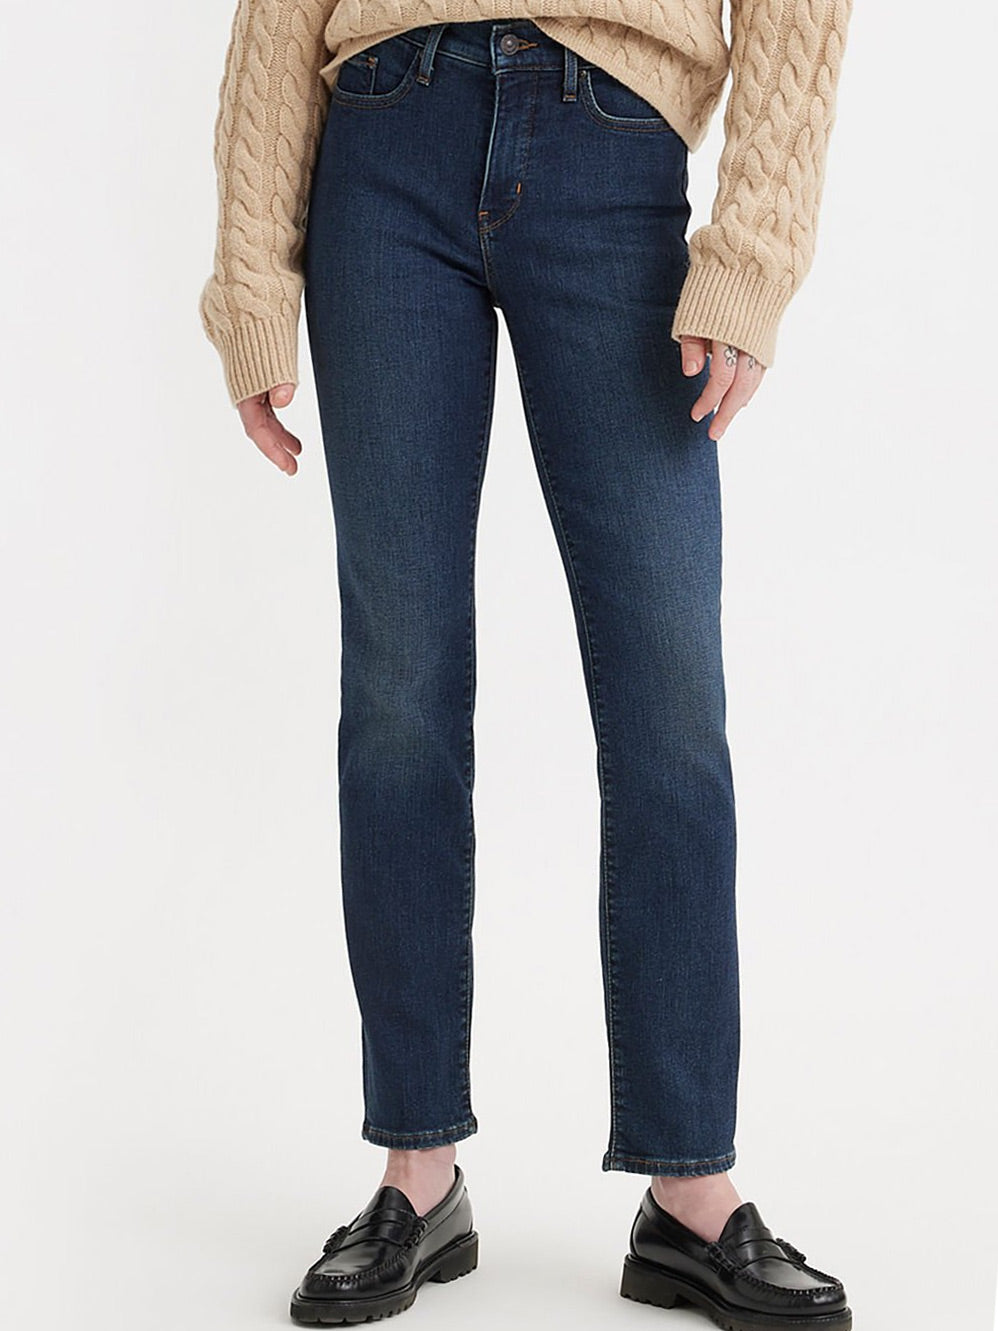 LEVI'S 314 SHAPING STRAIGHT JEAN